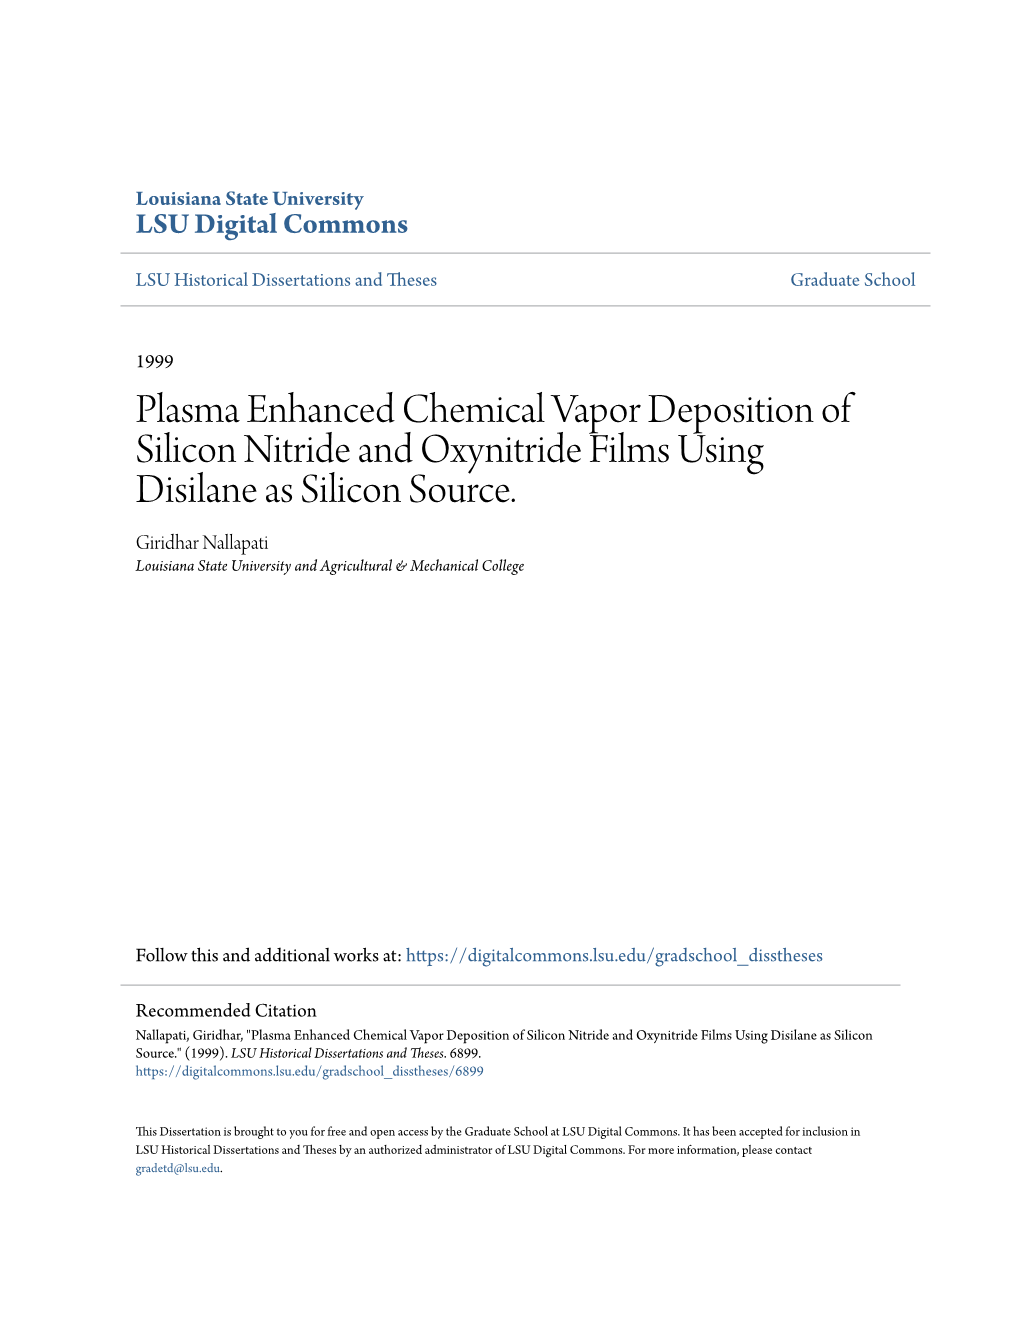 Plasma Enhanced Chemical Vapor Deposition of Silicon Nitride and Oxynitride Films Using Disilane As Silicon Source